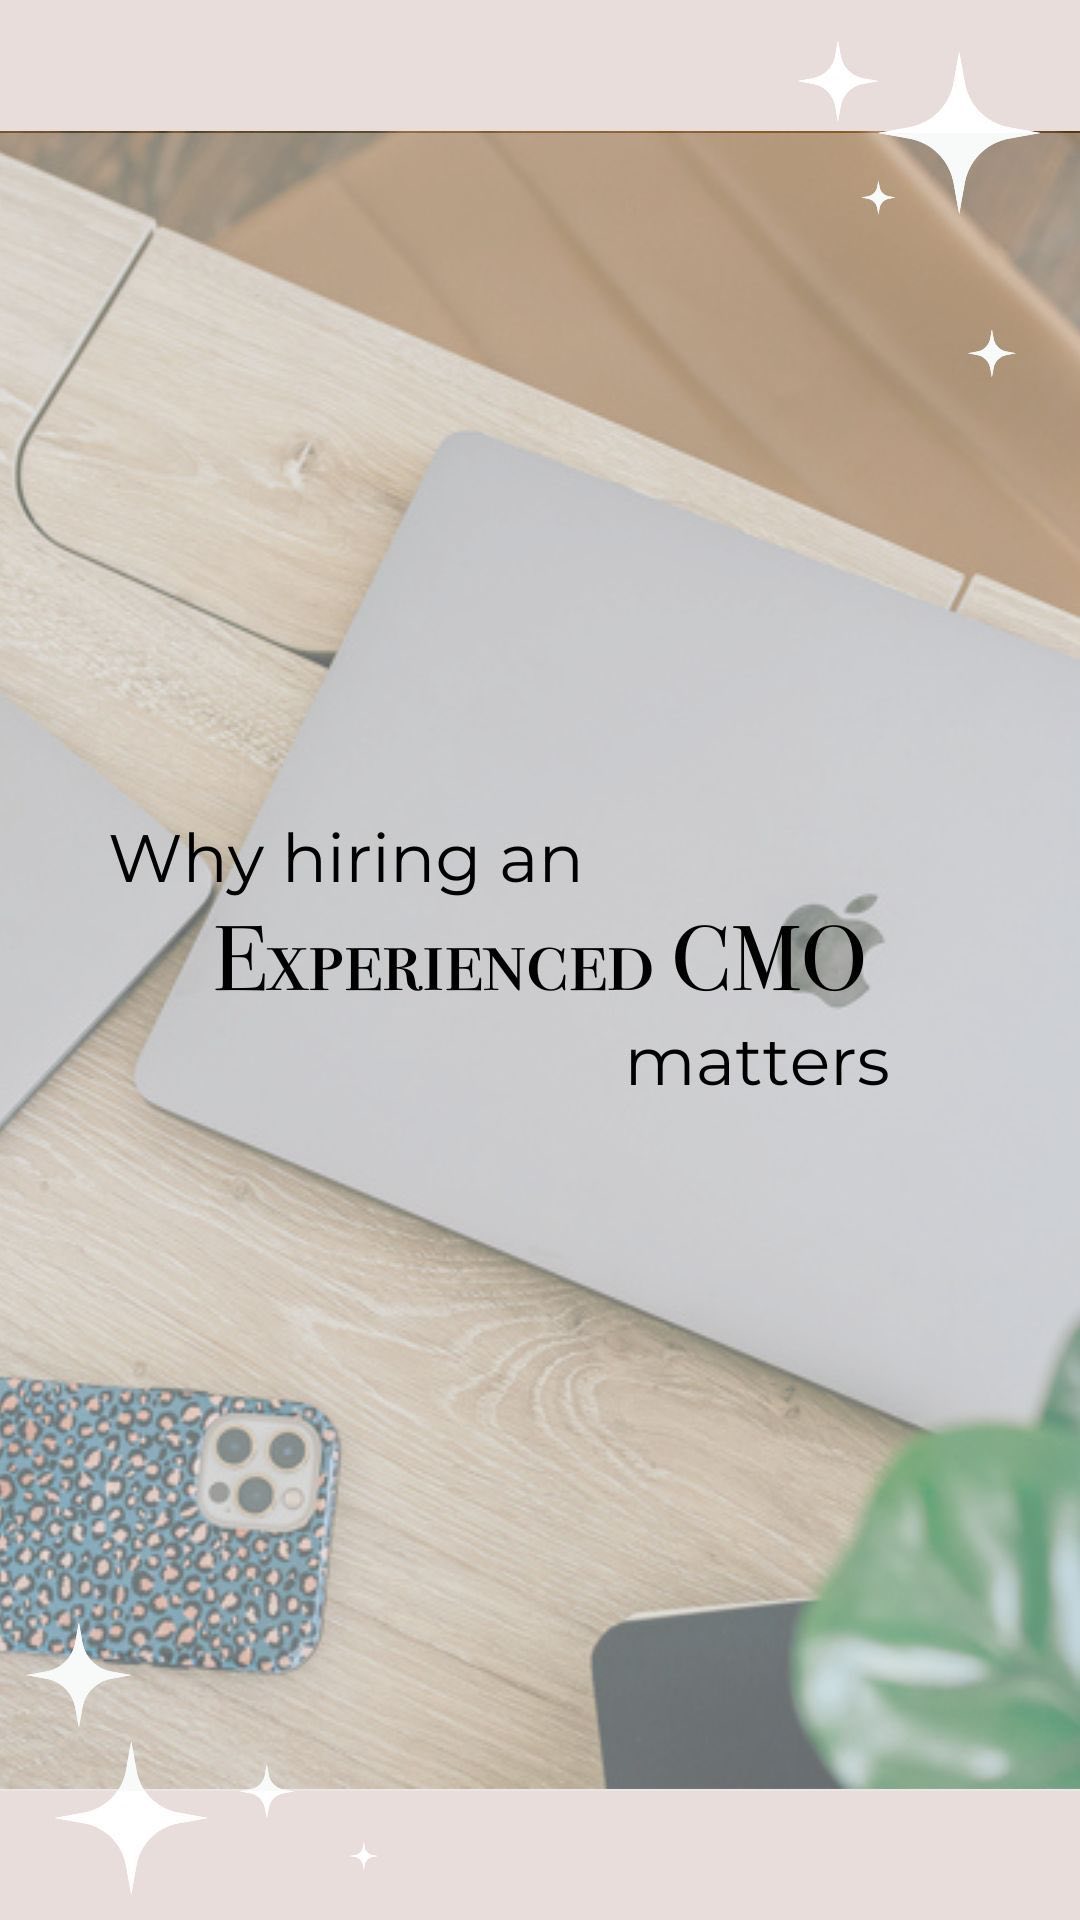 Why is it important to hire an experienced CMO rather than perhaps moving someone from your existing team into that role? 🤔

Good CMOS have experience in a WIDE variety of marketing methods and can speak the language of SEO, social media, web development, and all the other worlds that need to come together to make your marketing successful. 

They’re also masters at evaluating what skills are needed for different types of tasks, so your business can become mega streamlined and so much more efficient!

Our GROUNDED: Holistic CEO Coaching & Fractional CMO Program gives you access to an experienced CMO without the added cost of having to hire a full-time employee! Learn more at the link in our bio 🥰

#cmo #fractionalcmo #marketingtips #marketingstrategy #smallbusinessgrowth #femaleowned #femaleownedbusiness